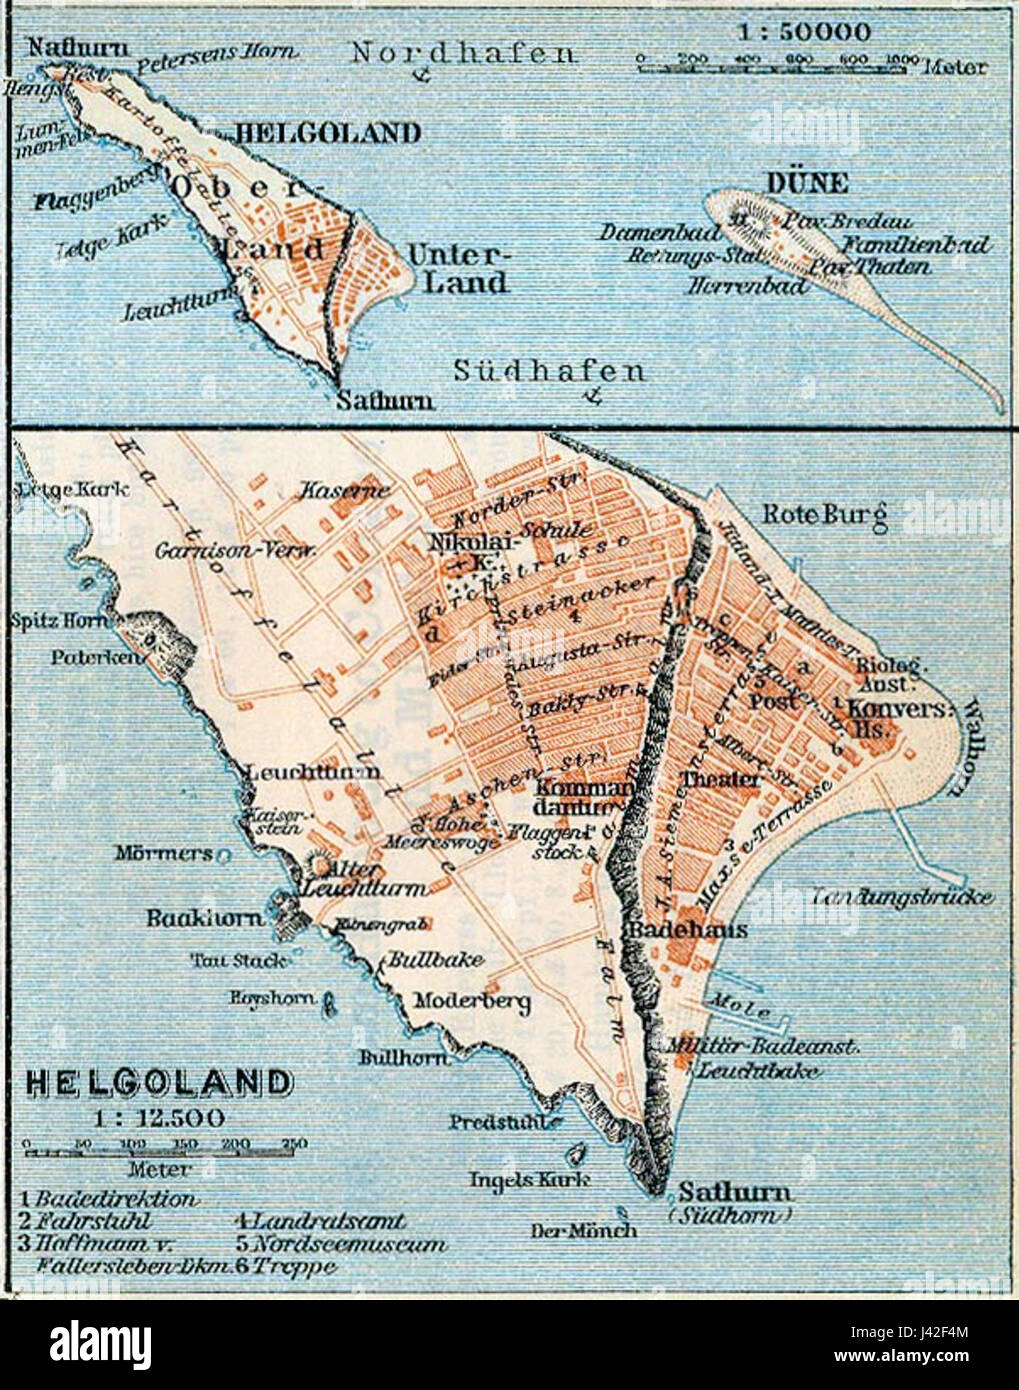 helgoland karte 1900 Map Helgoland High Resolution Stock Photography And Images Alamy helgoland karte 1900